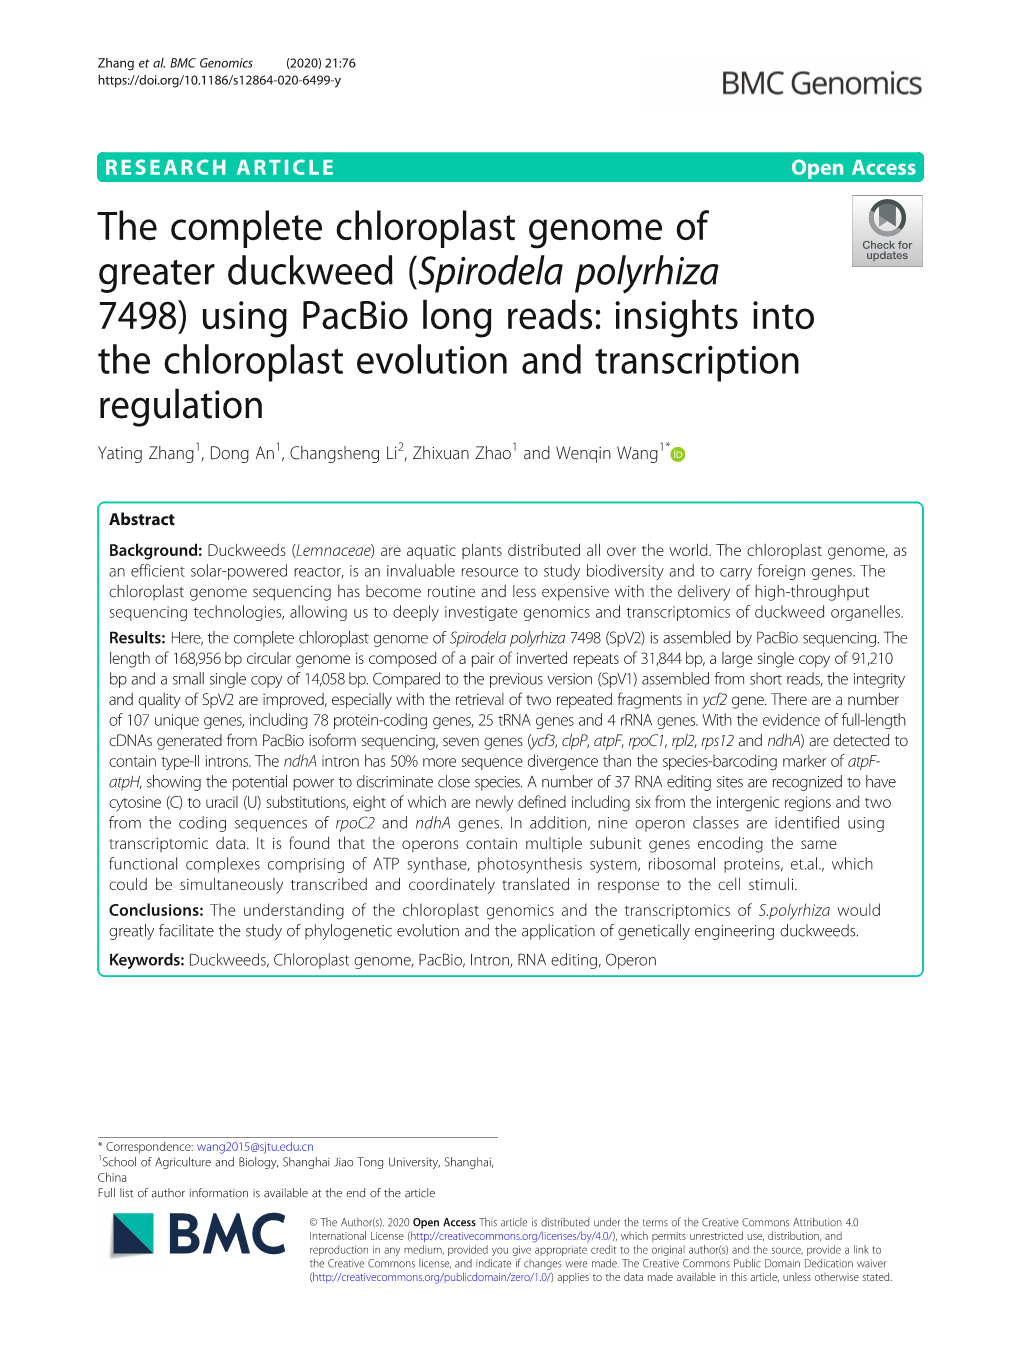 The Complete Chloroplast Genome of Greater Duckweed